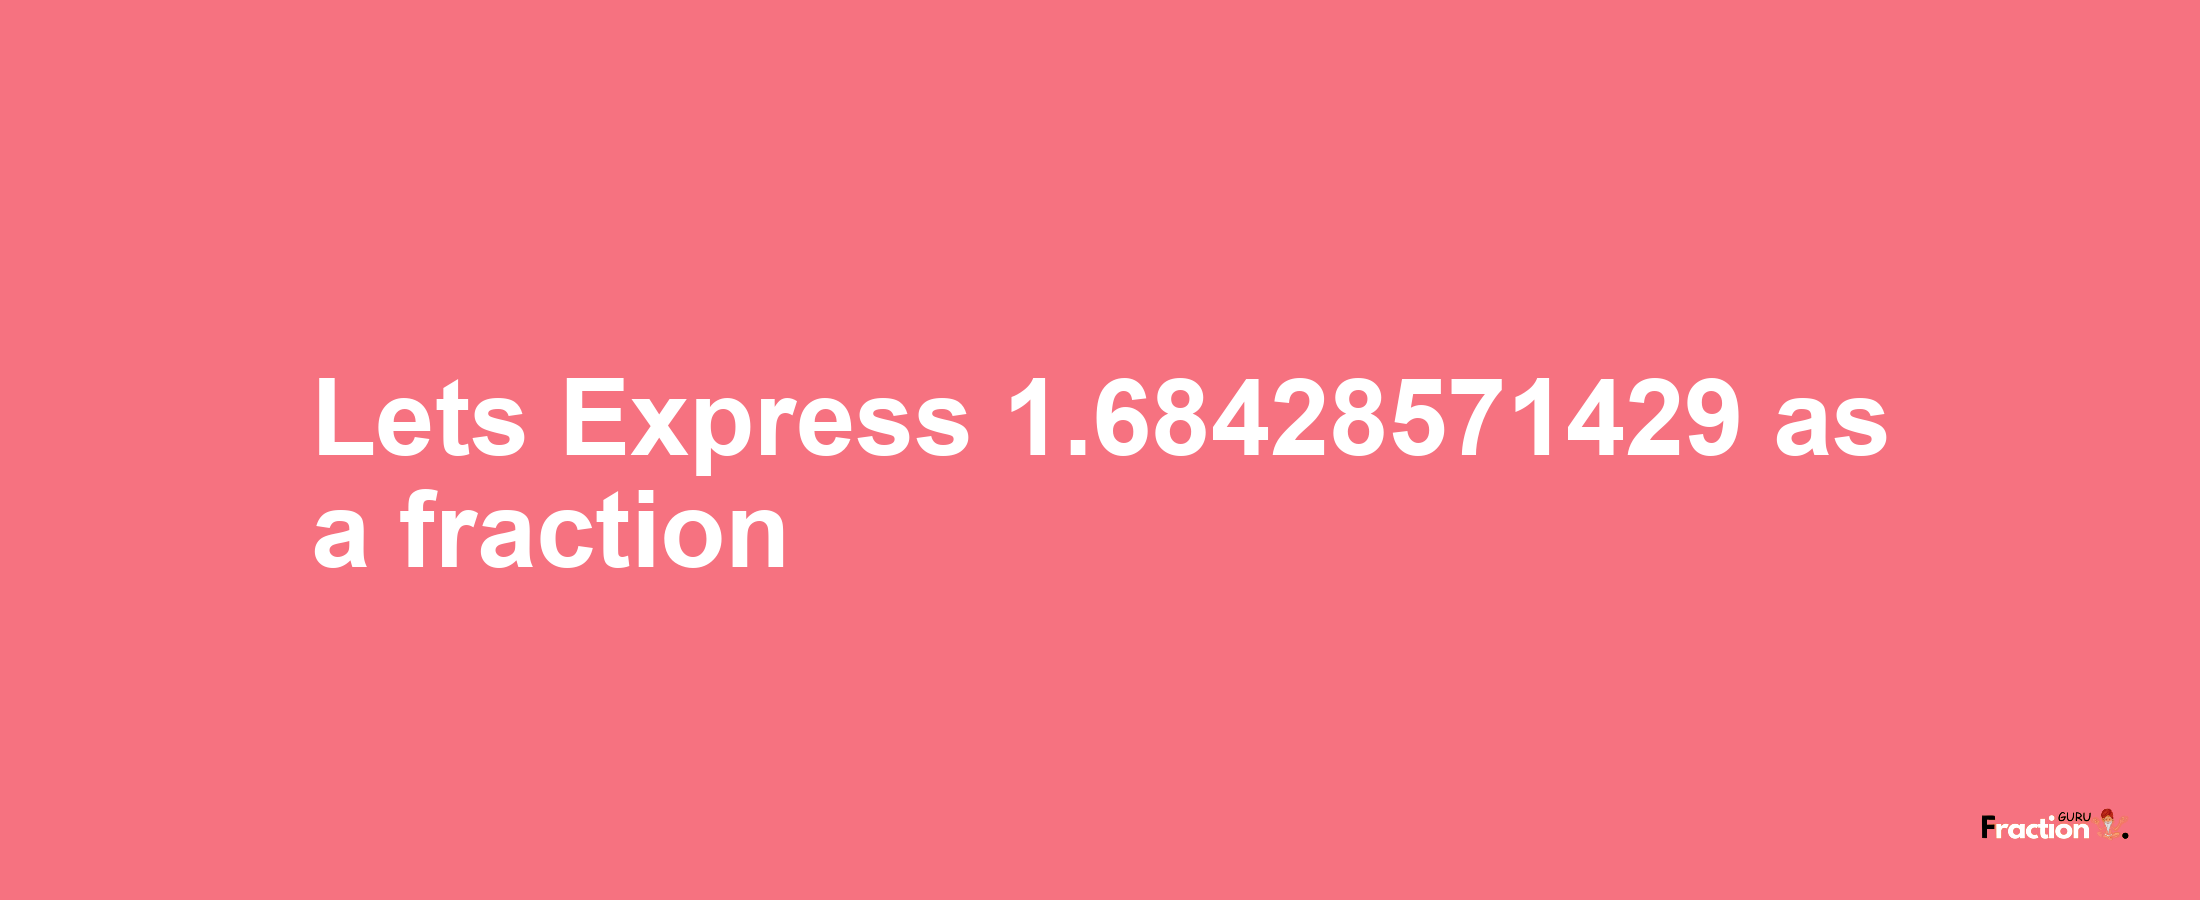 Lets Express 1.68428571429 as afraction